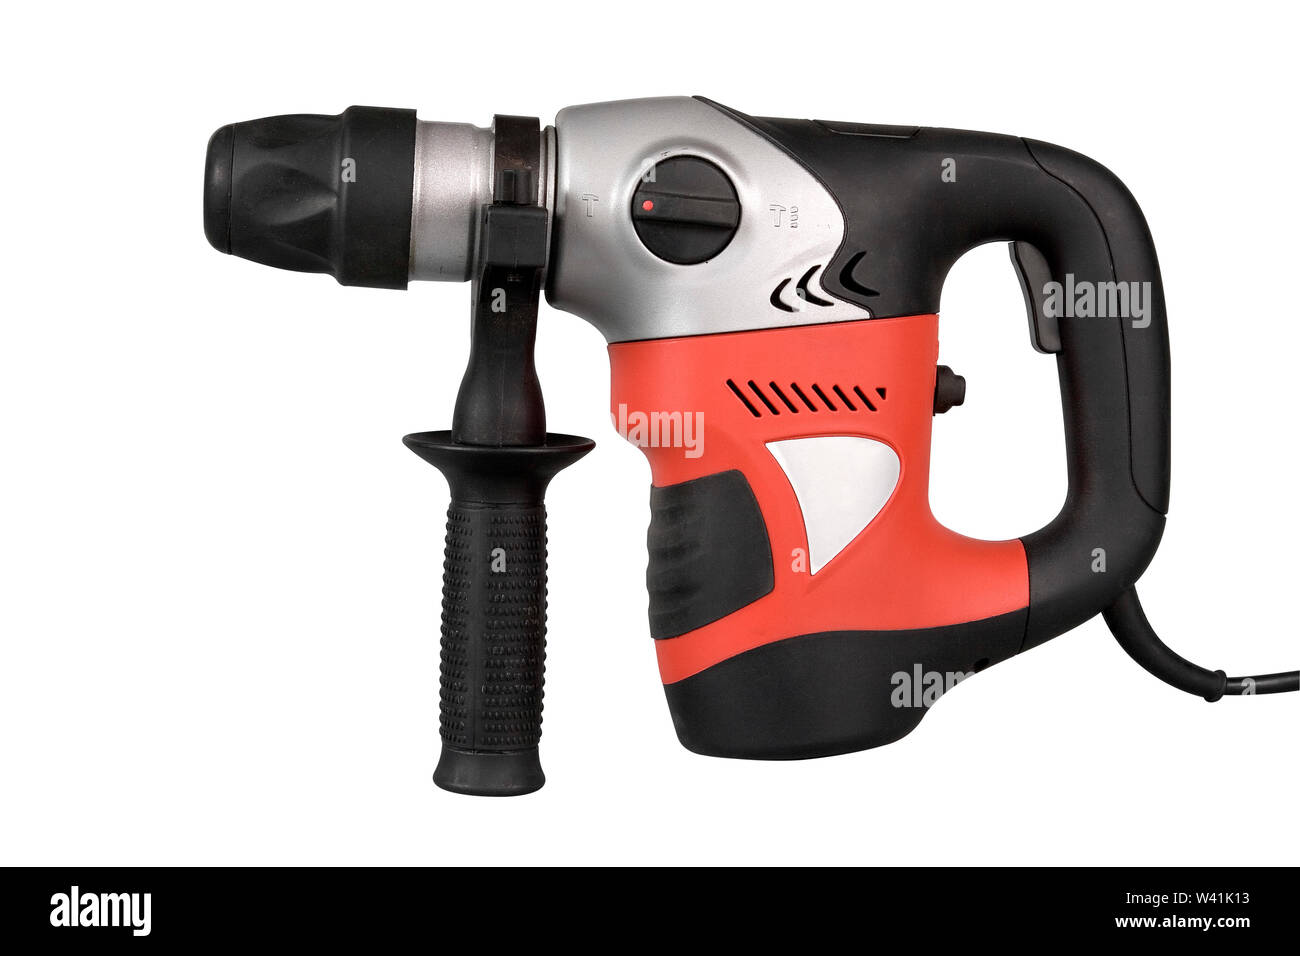 https://c8.alamy.com/comp/W41K13/powerful-professional-rotary-hammer-drill-isolated-on-white-background-with-clipping-path-W41K13.jpg